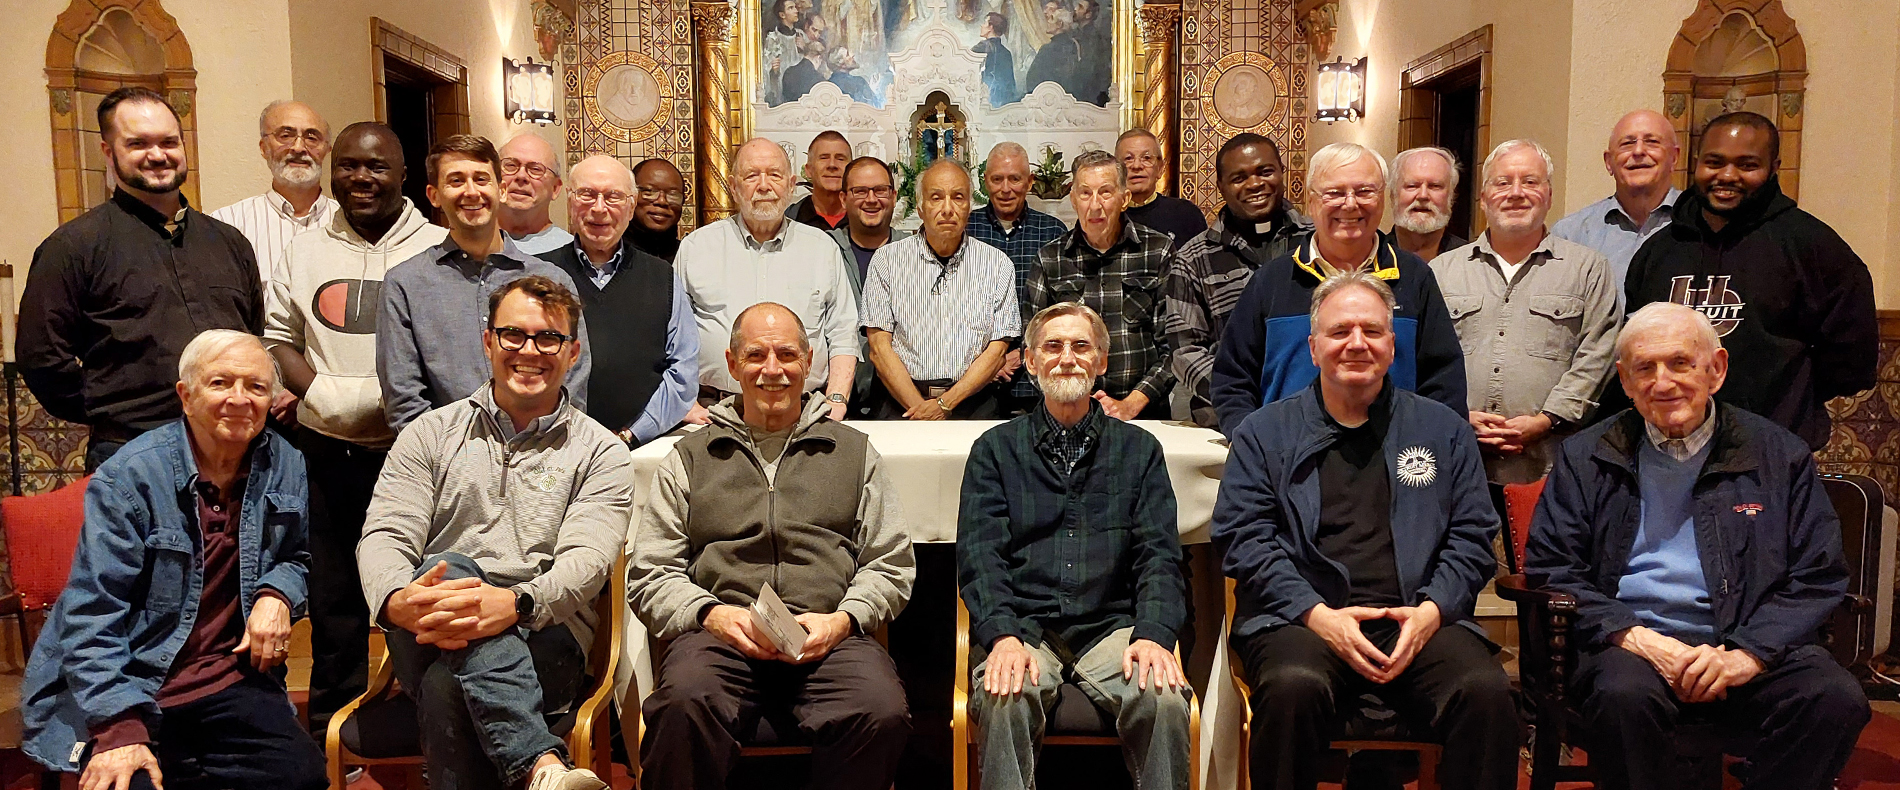 The Detroit Jesuit Community, featuring more than two dozen people sitting and standing inside of a church.